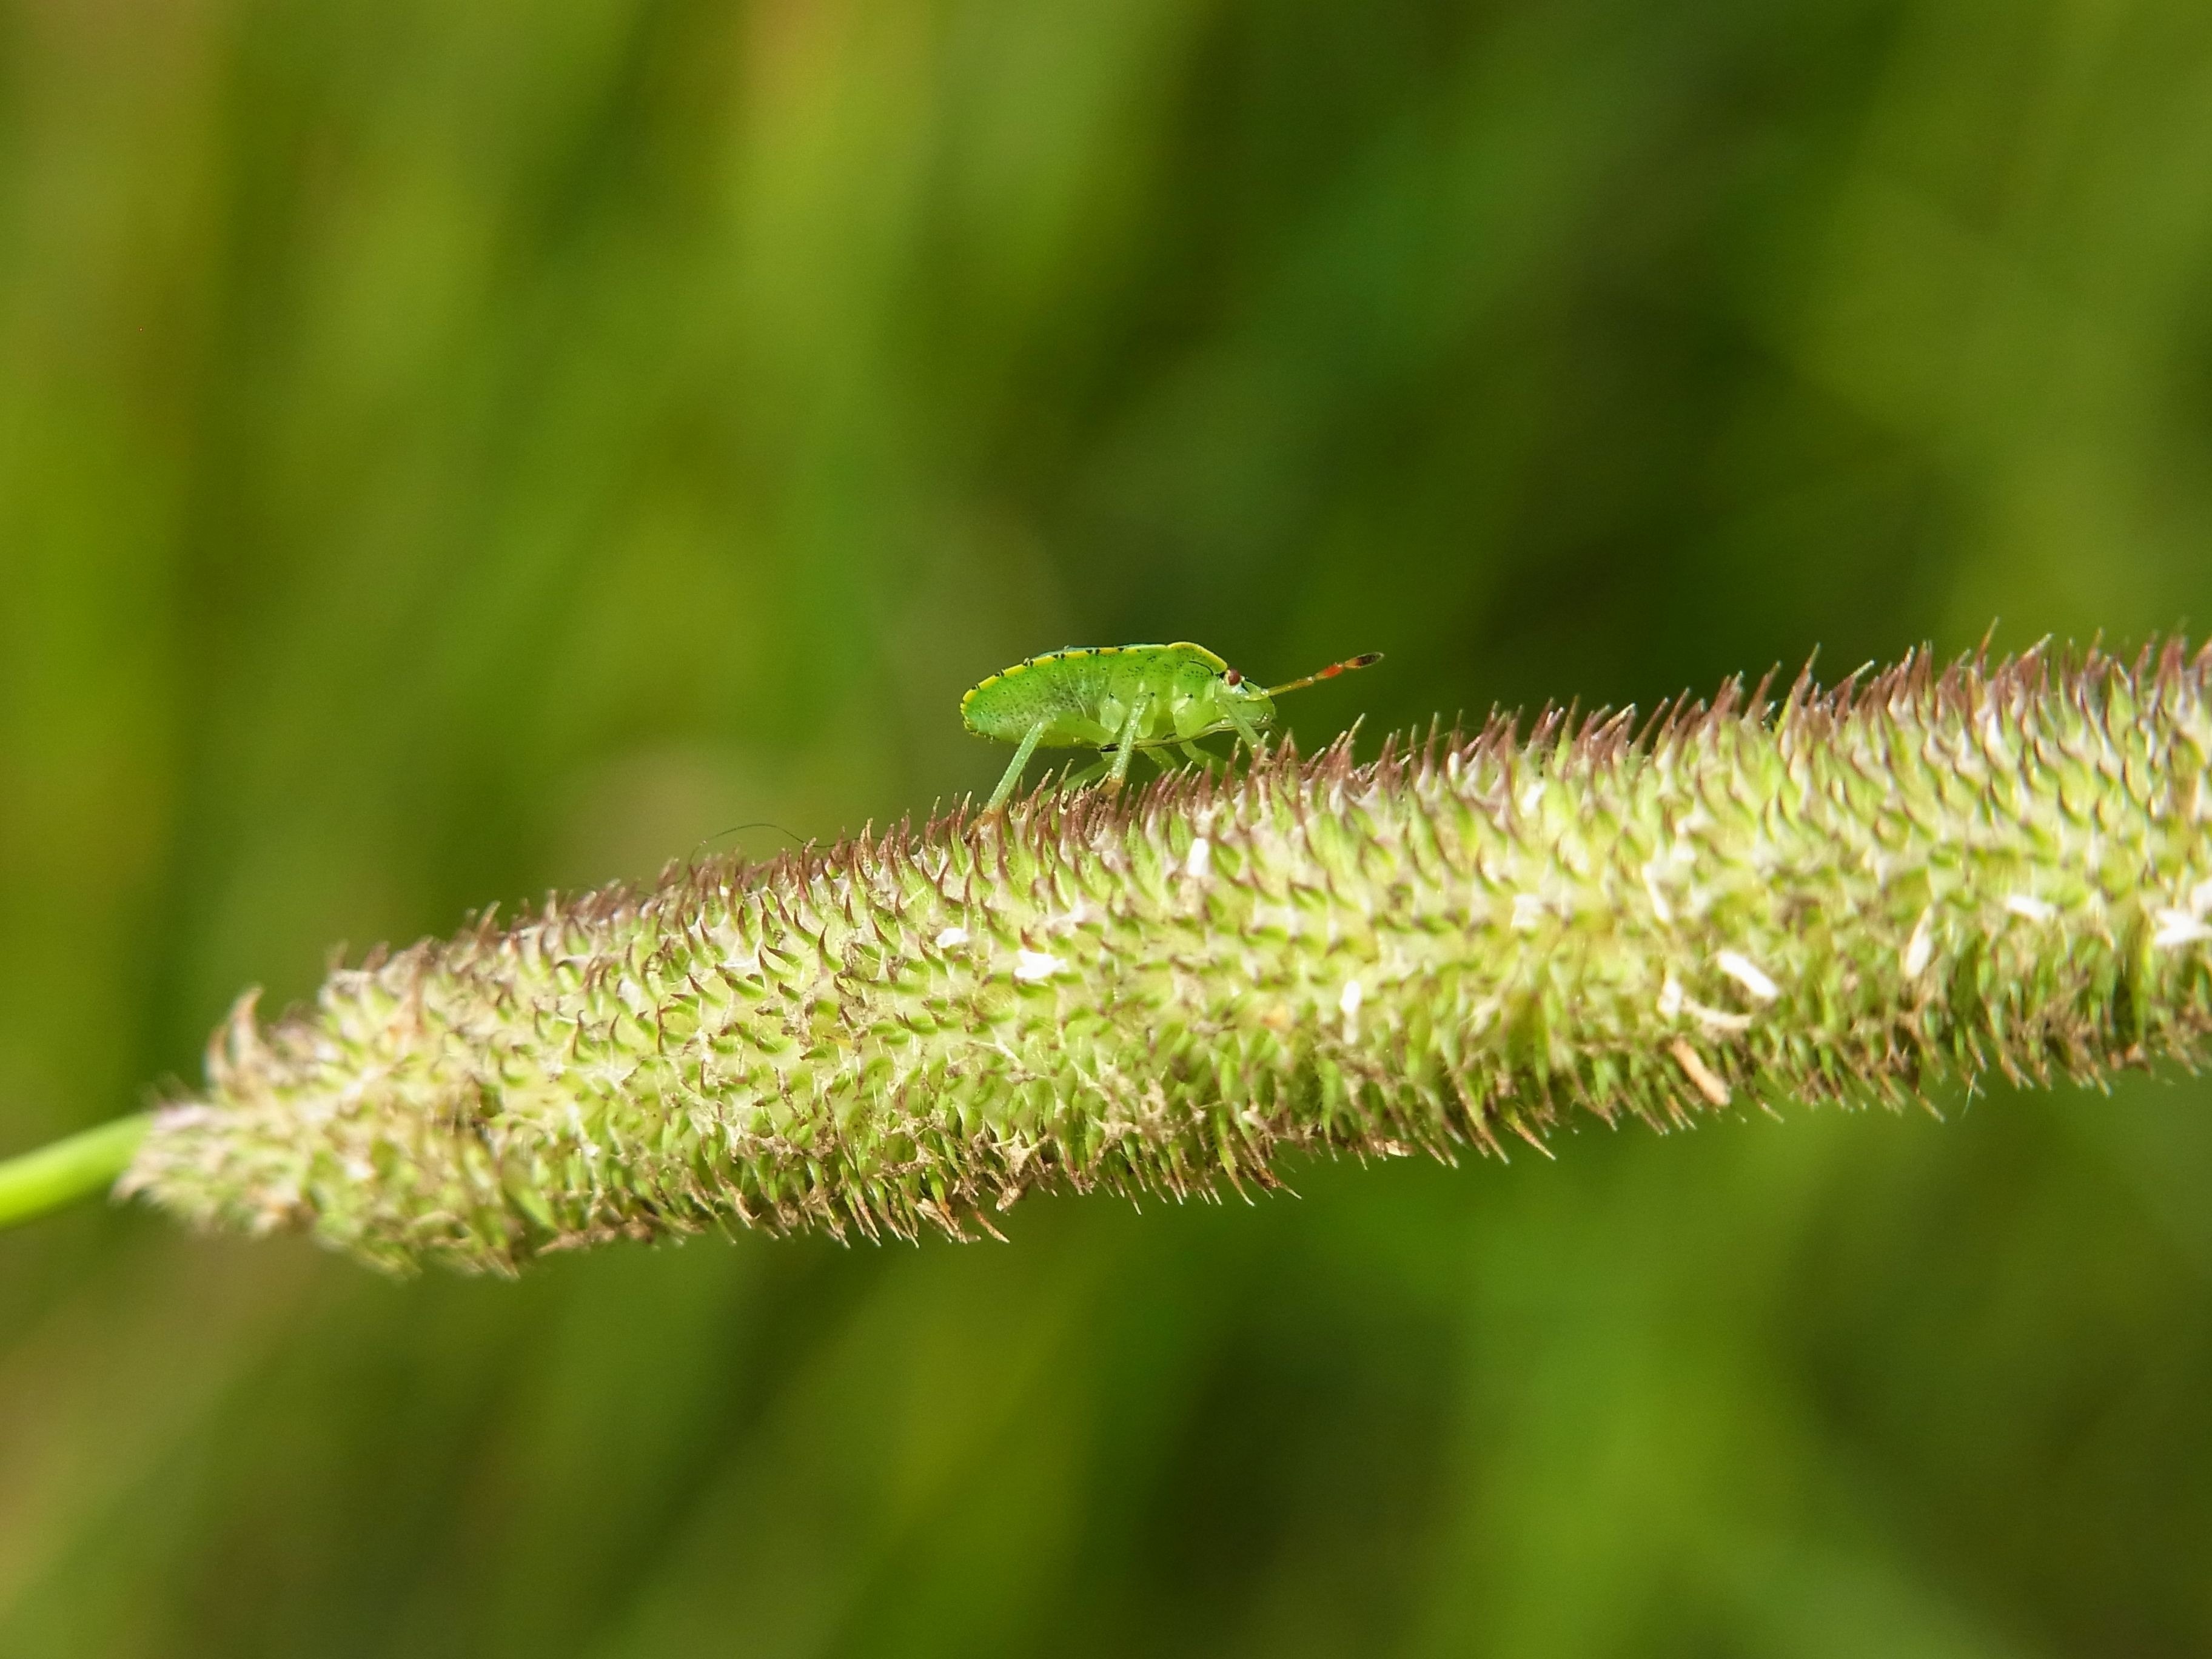 green insect